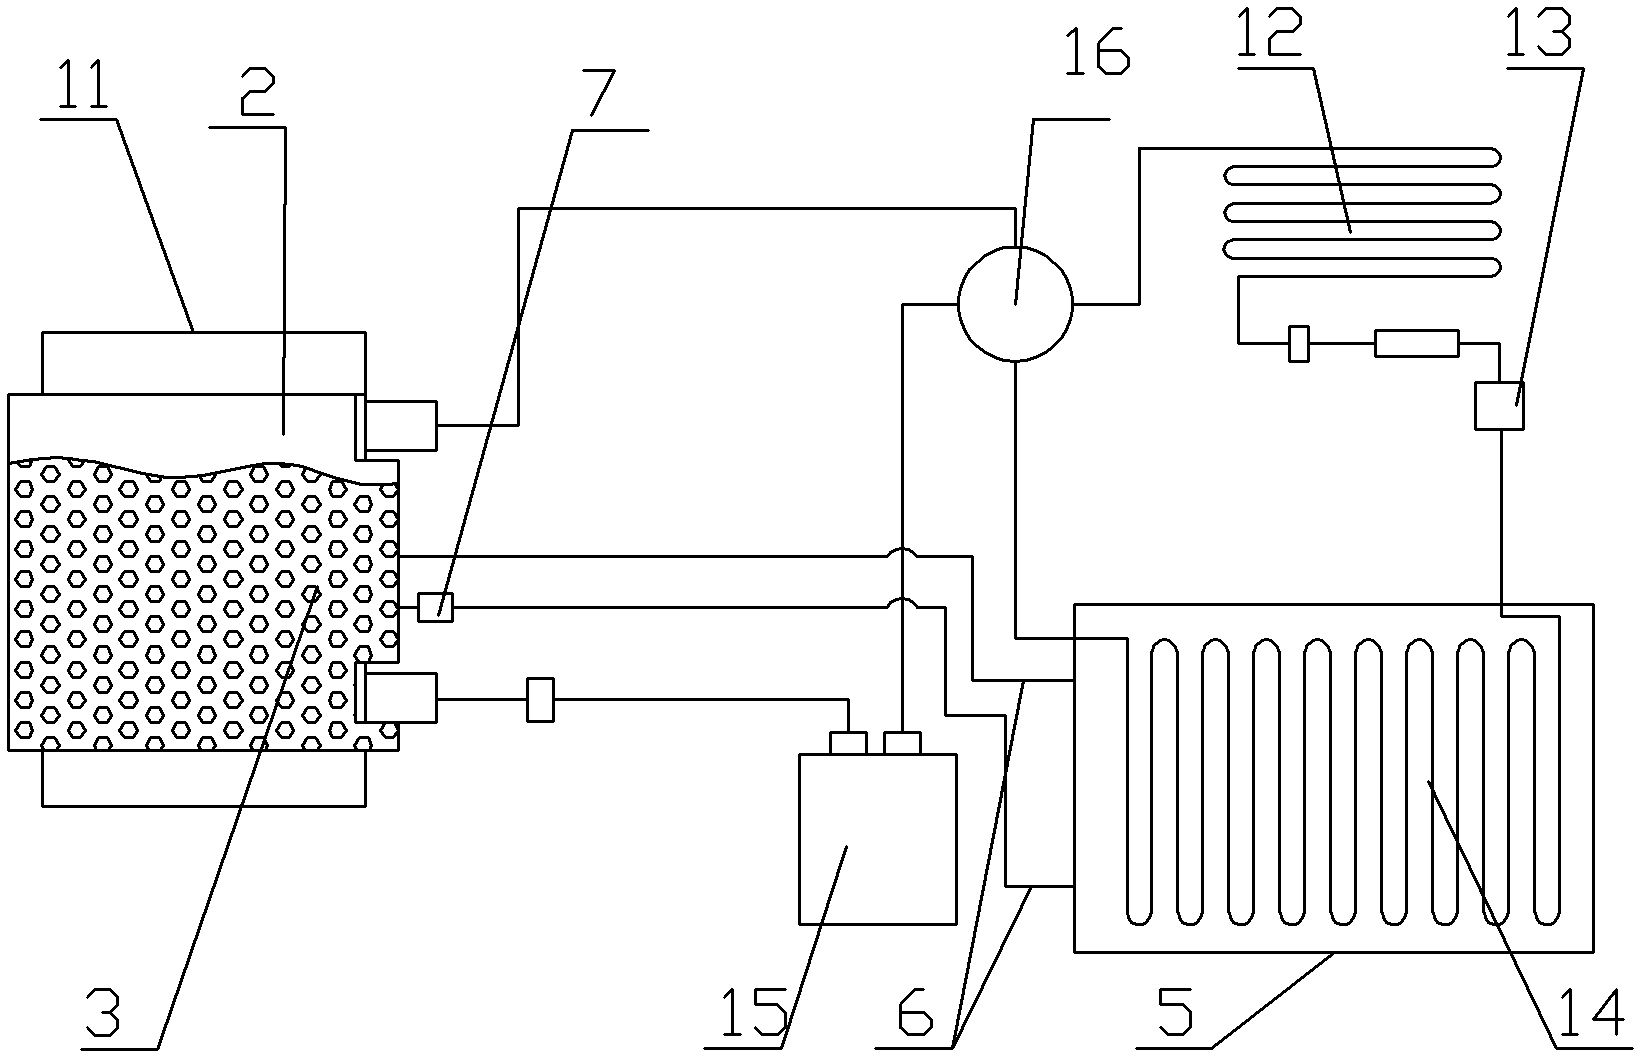 Air-conditioning system with auxiliary defrosting system